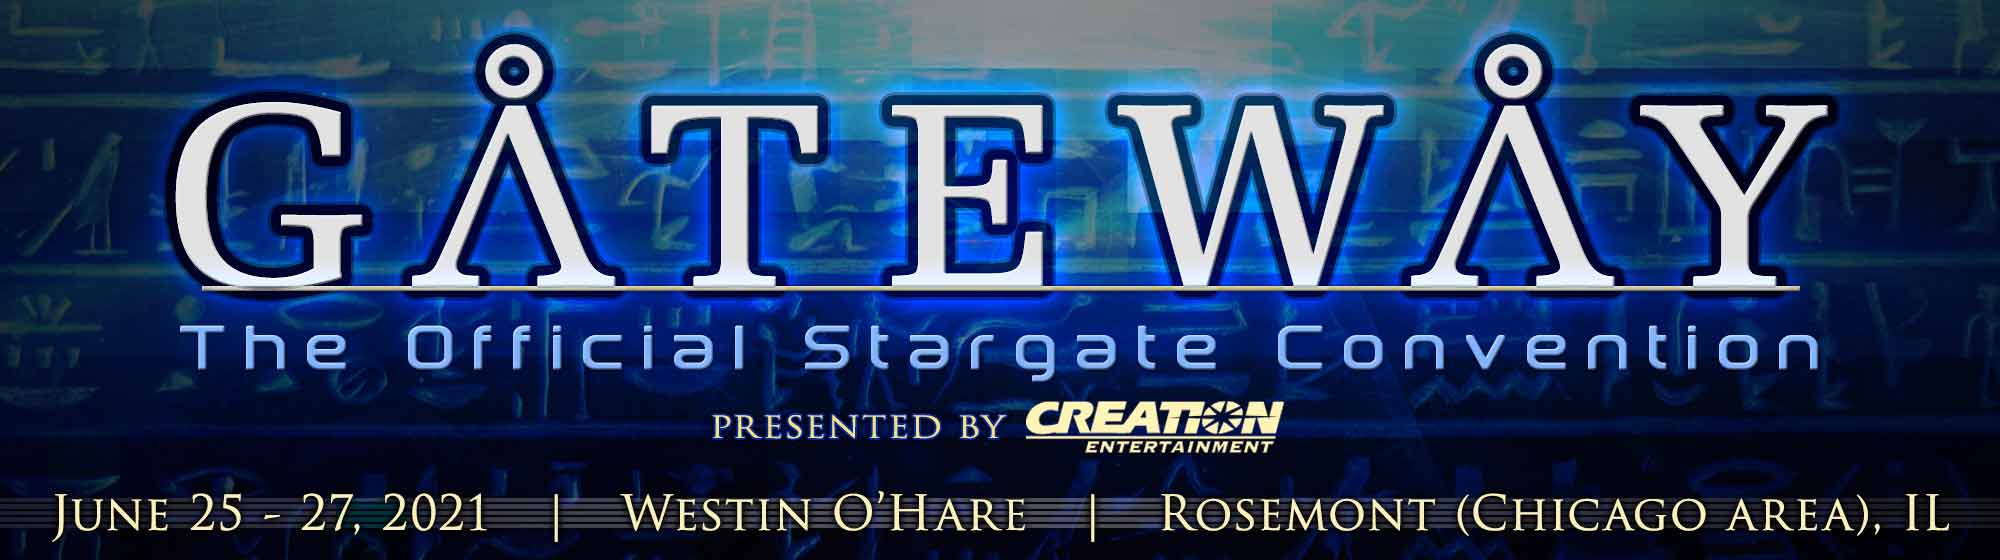 Creation Entertainment's presents Gateway: The Official Stargate Convention